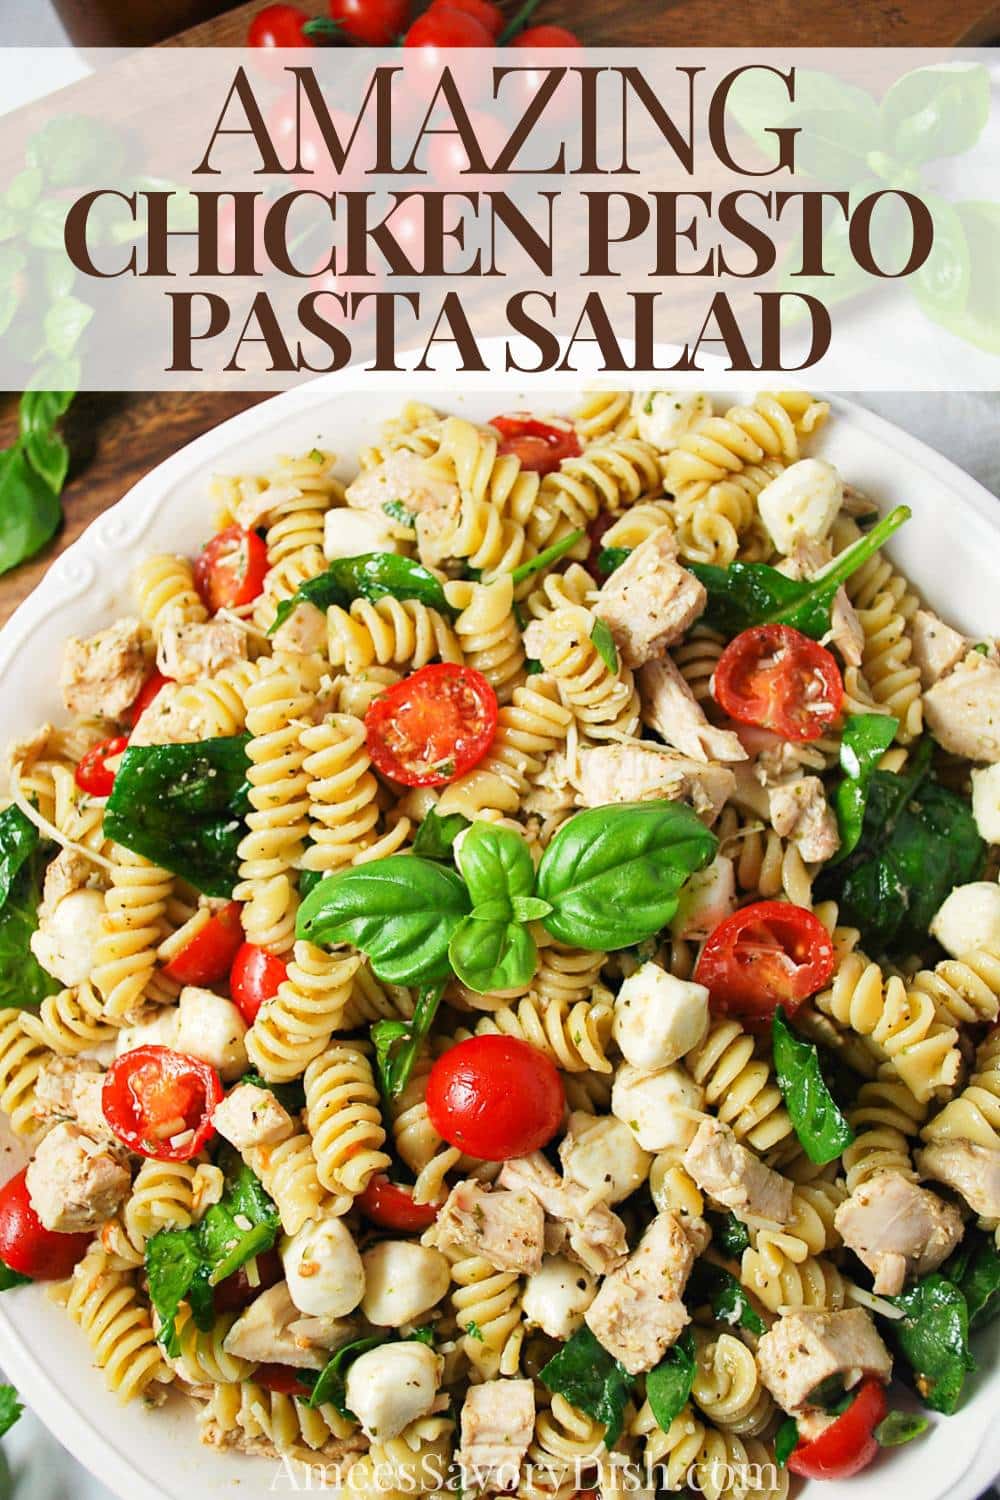 A delicious pasta salad made with tender chicken, tomatoes, baby spinach, fresh basil, and rich Italian cheese tossed in a flavorful pesto dressing. via @Ameessavorydish